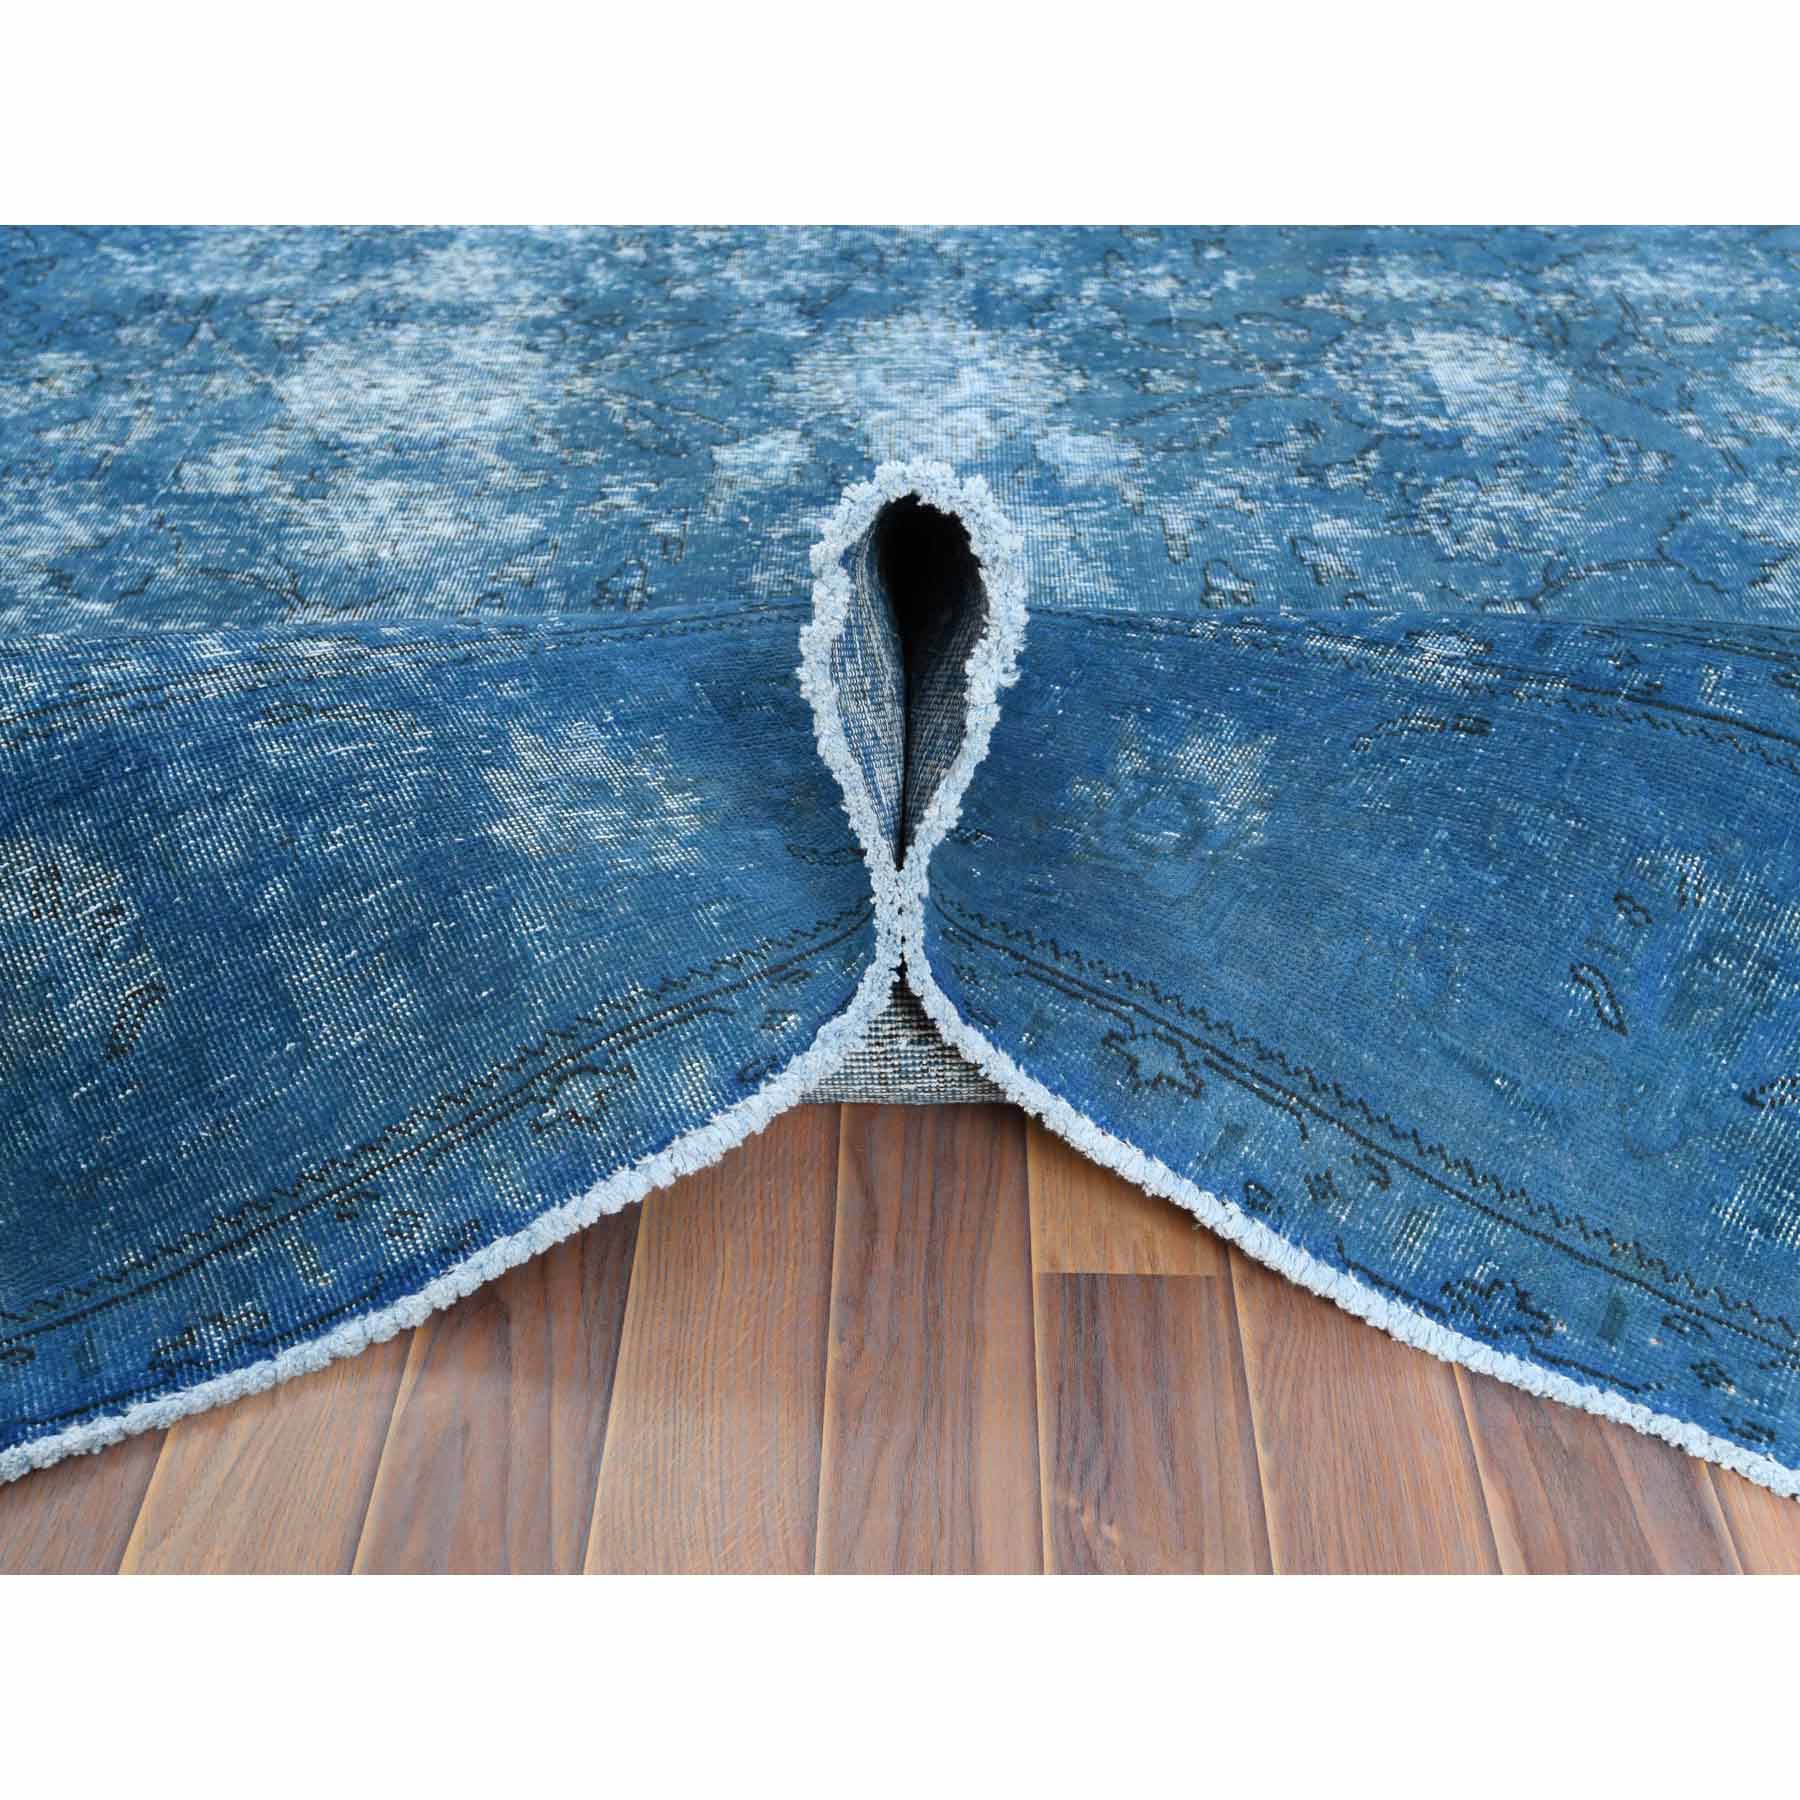 Overdyed-Vintage-Hand-Knotted-Rug-307435